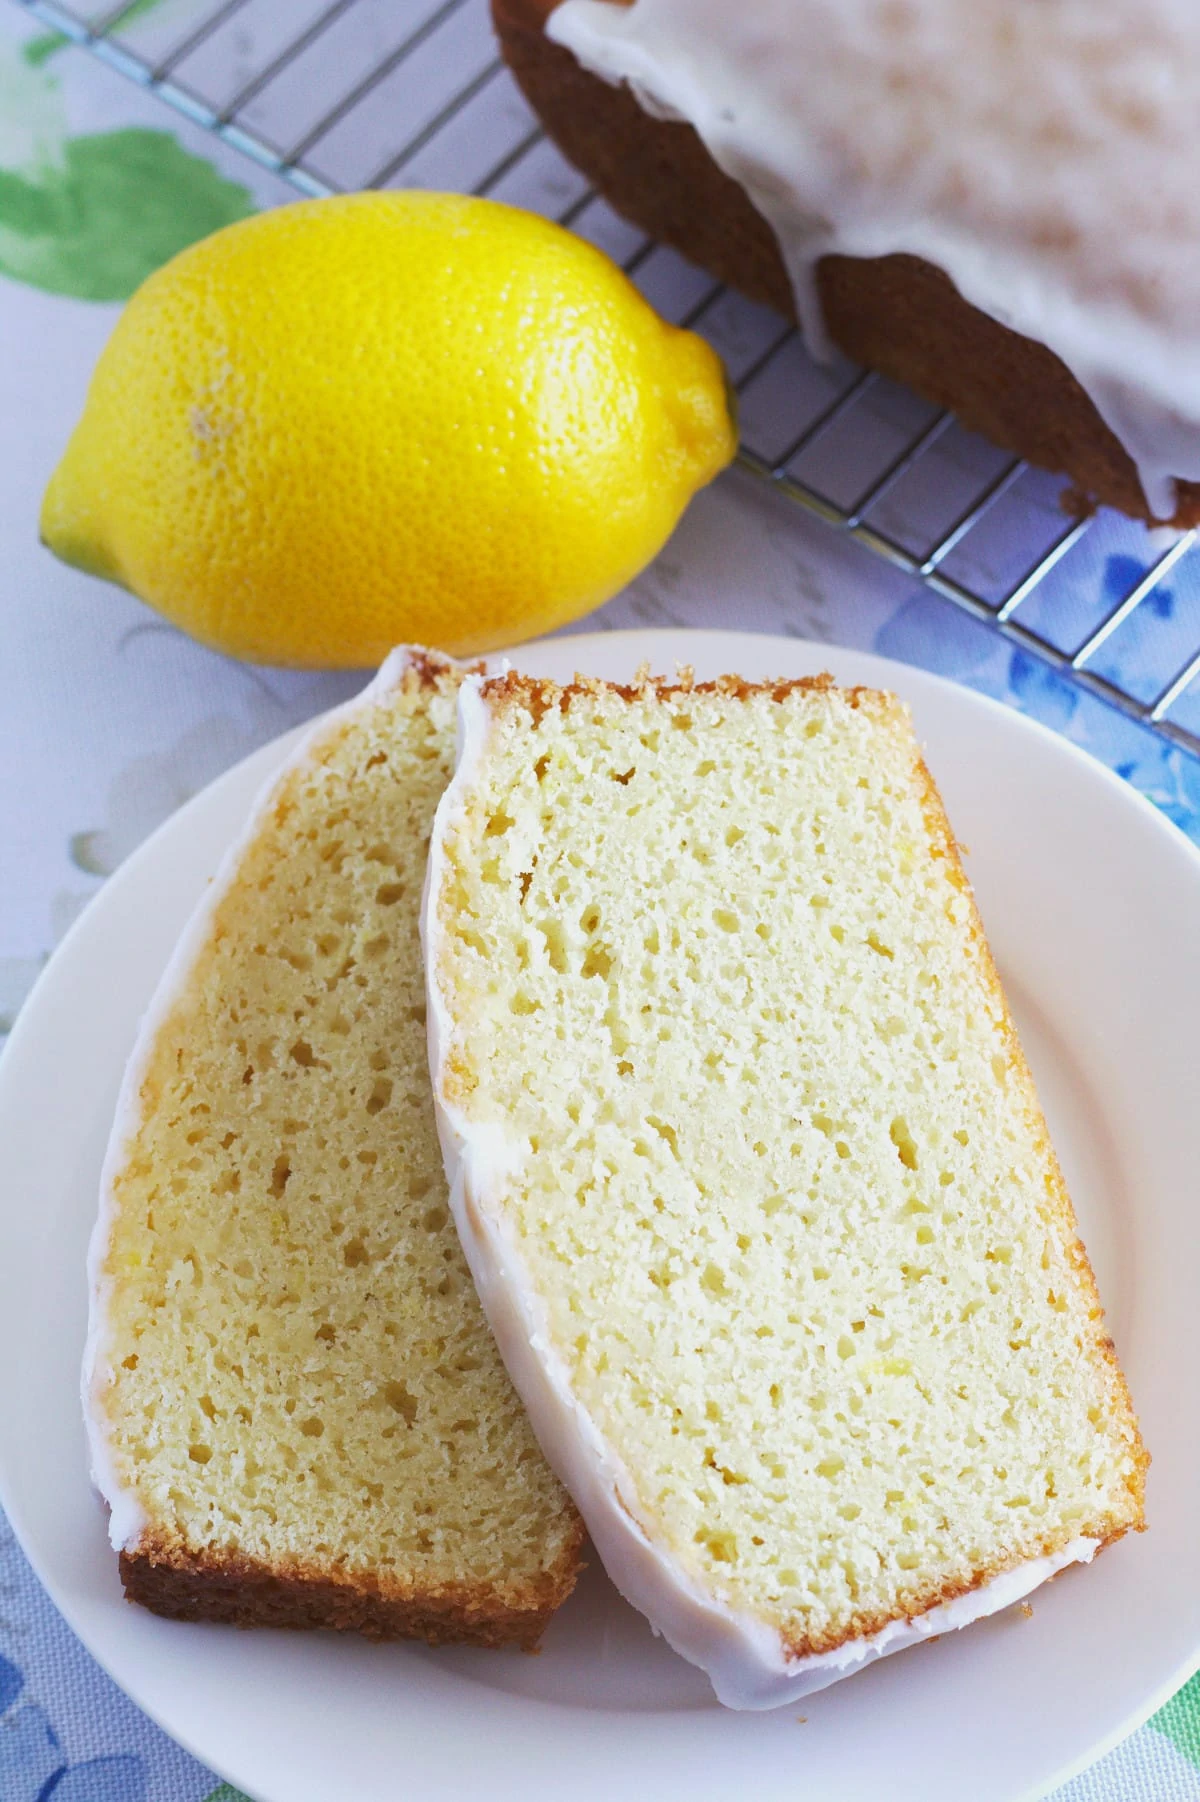 Two slices of lemon loaf on a plate with a lemon and the rest of the loaf.